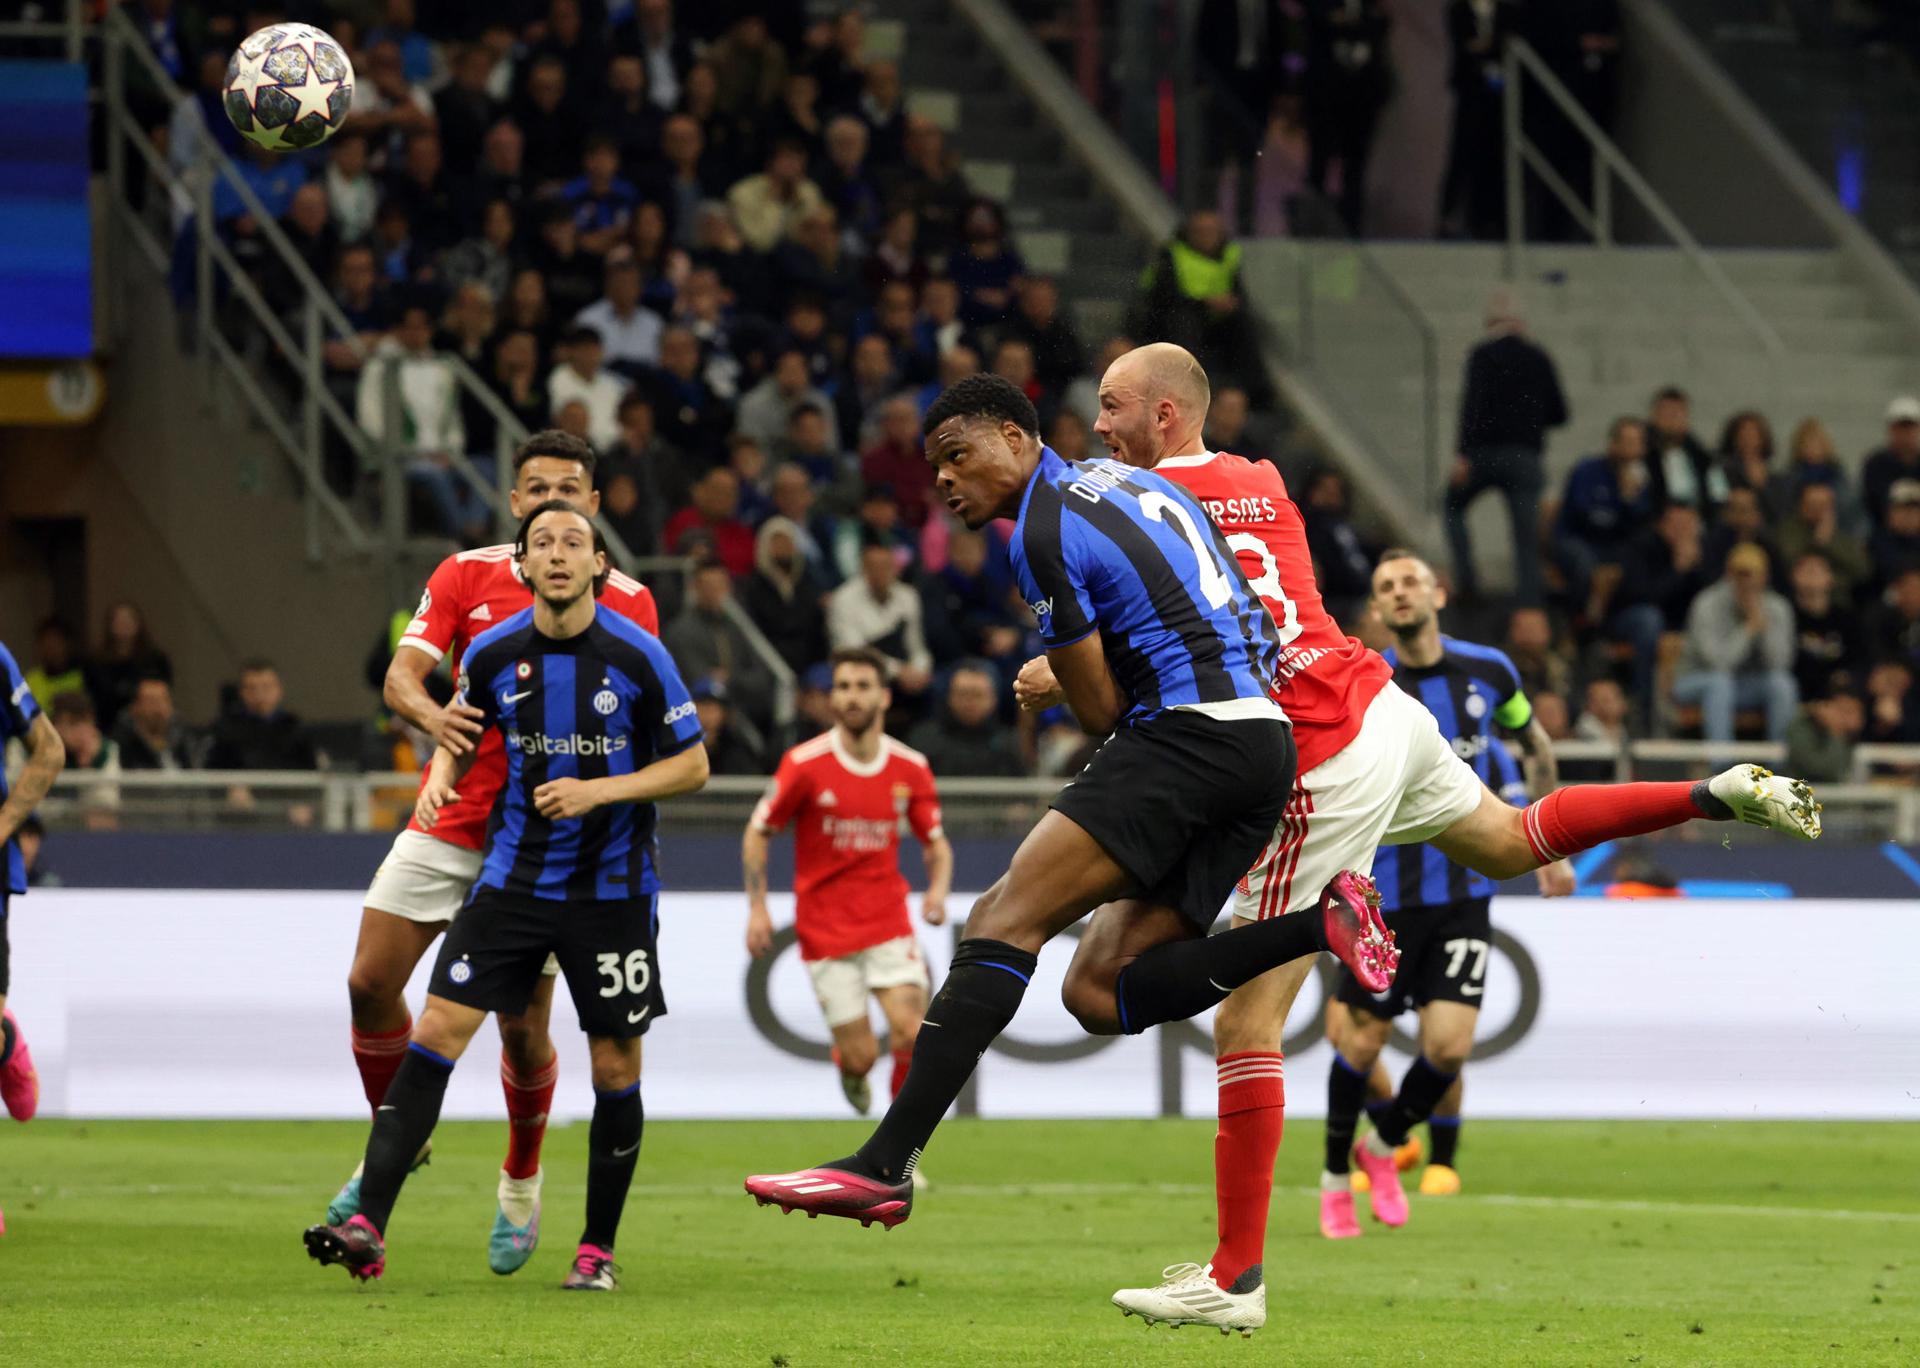 Benfica's Fredrik Aursnes (R in red) scores against Inter Milan during the UEFA Champions League quarterfinal second leg in Milan, Italy, on 19 April 2023. EFE/EPA/MATTEO BAZZI
